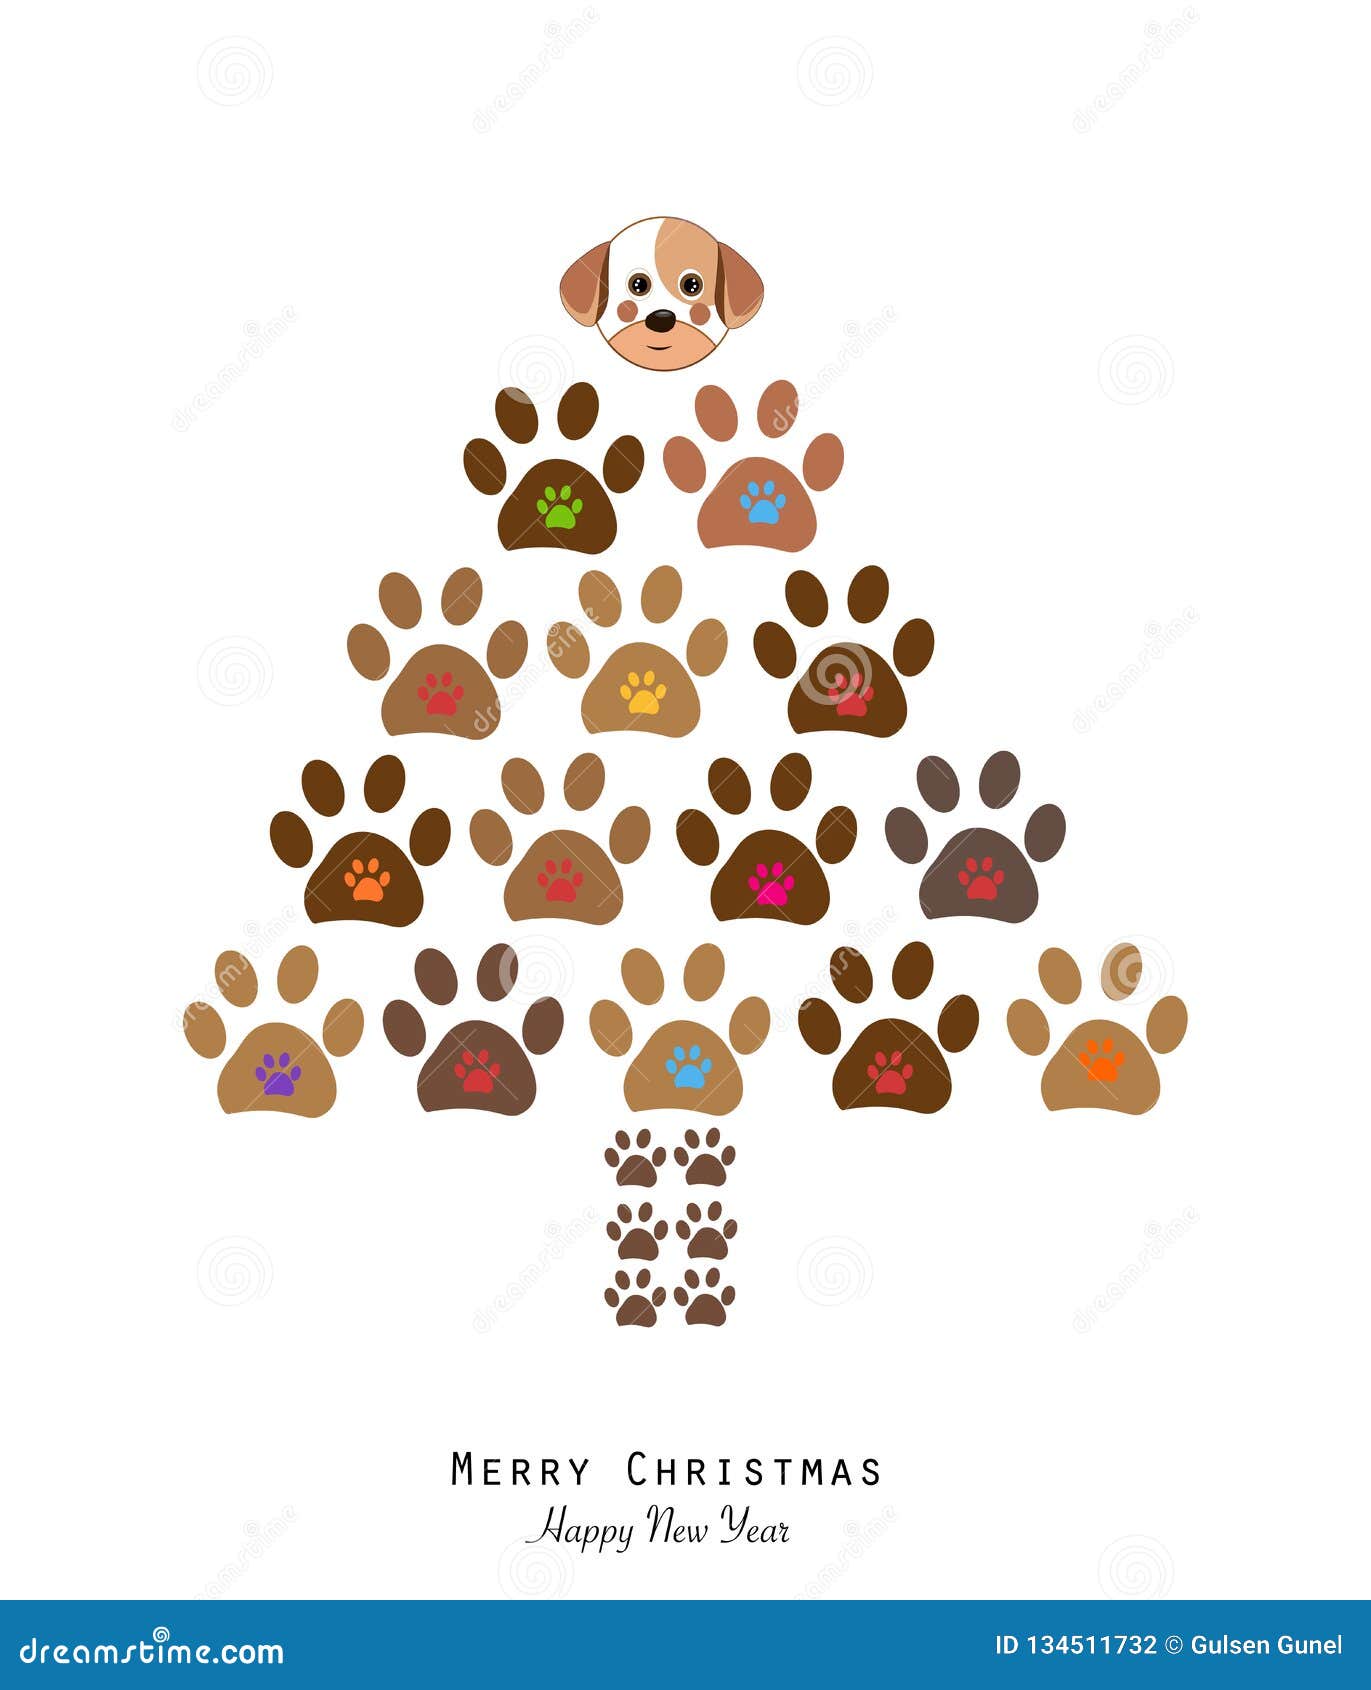 Made Of Paw Print Christmas Tree With Colorful Paw Print